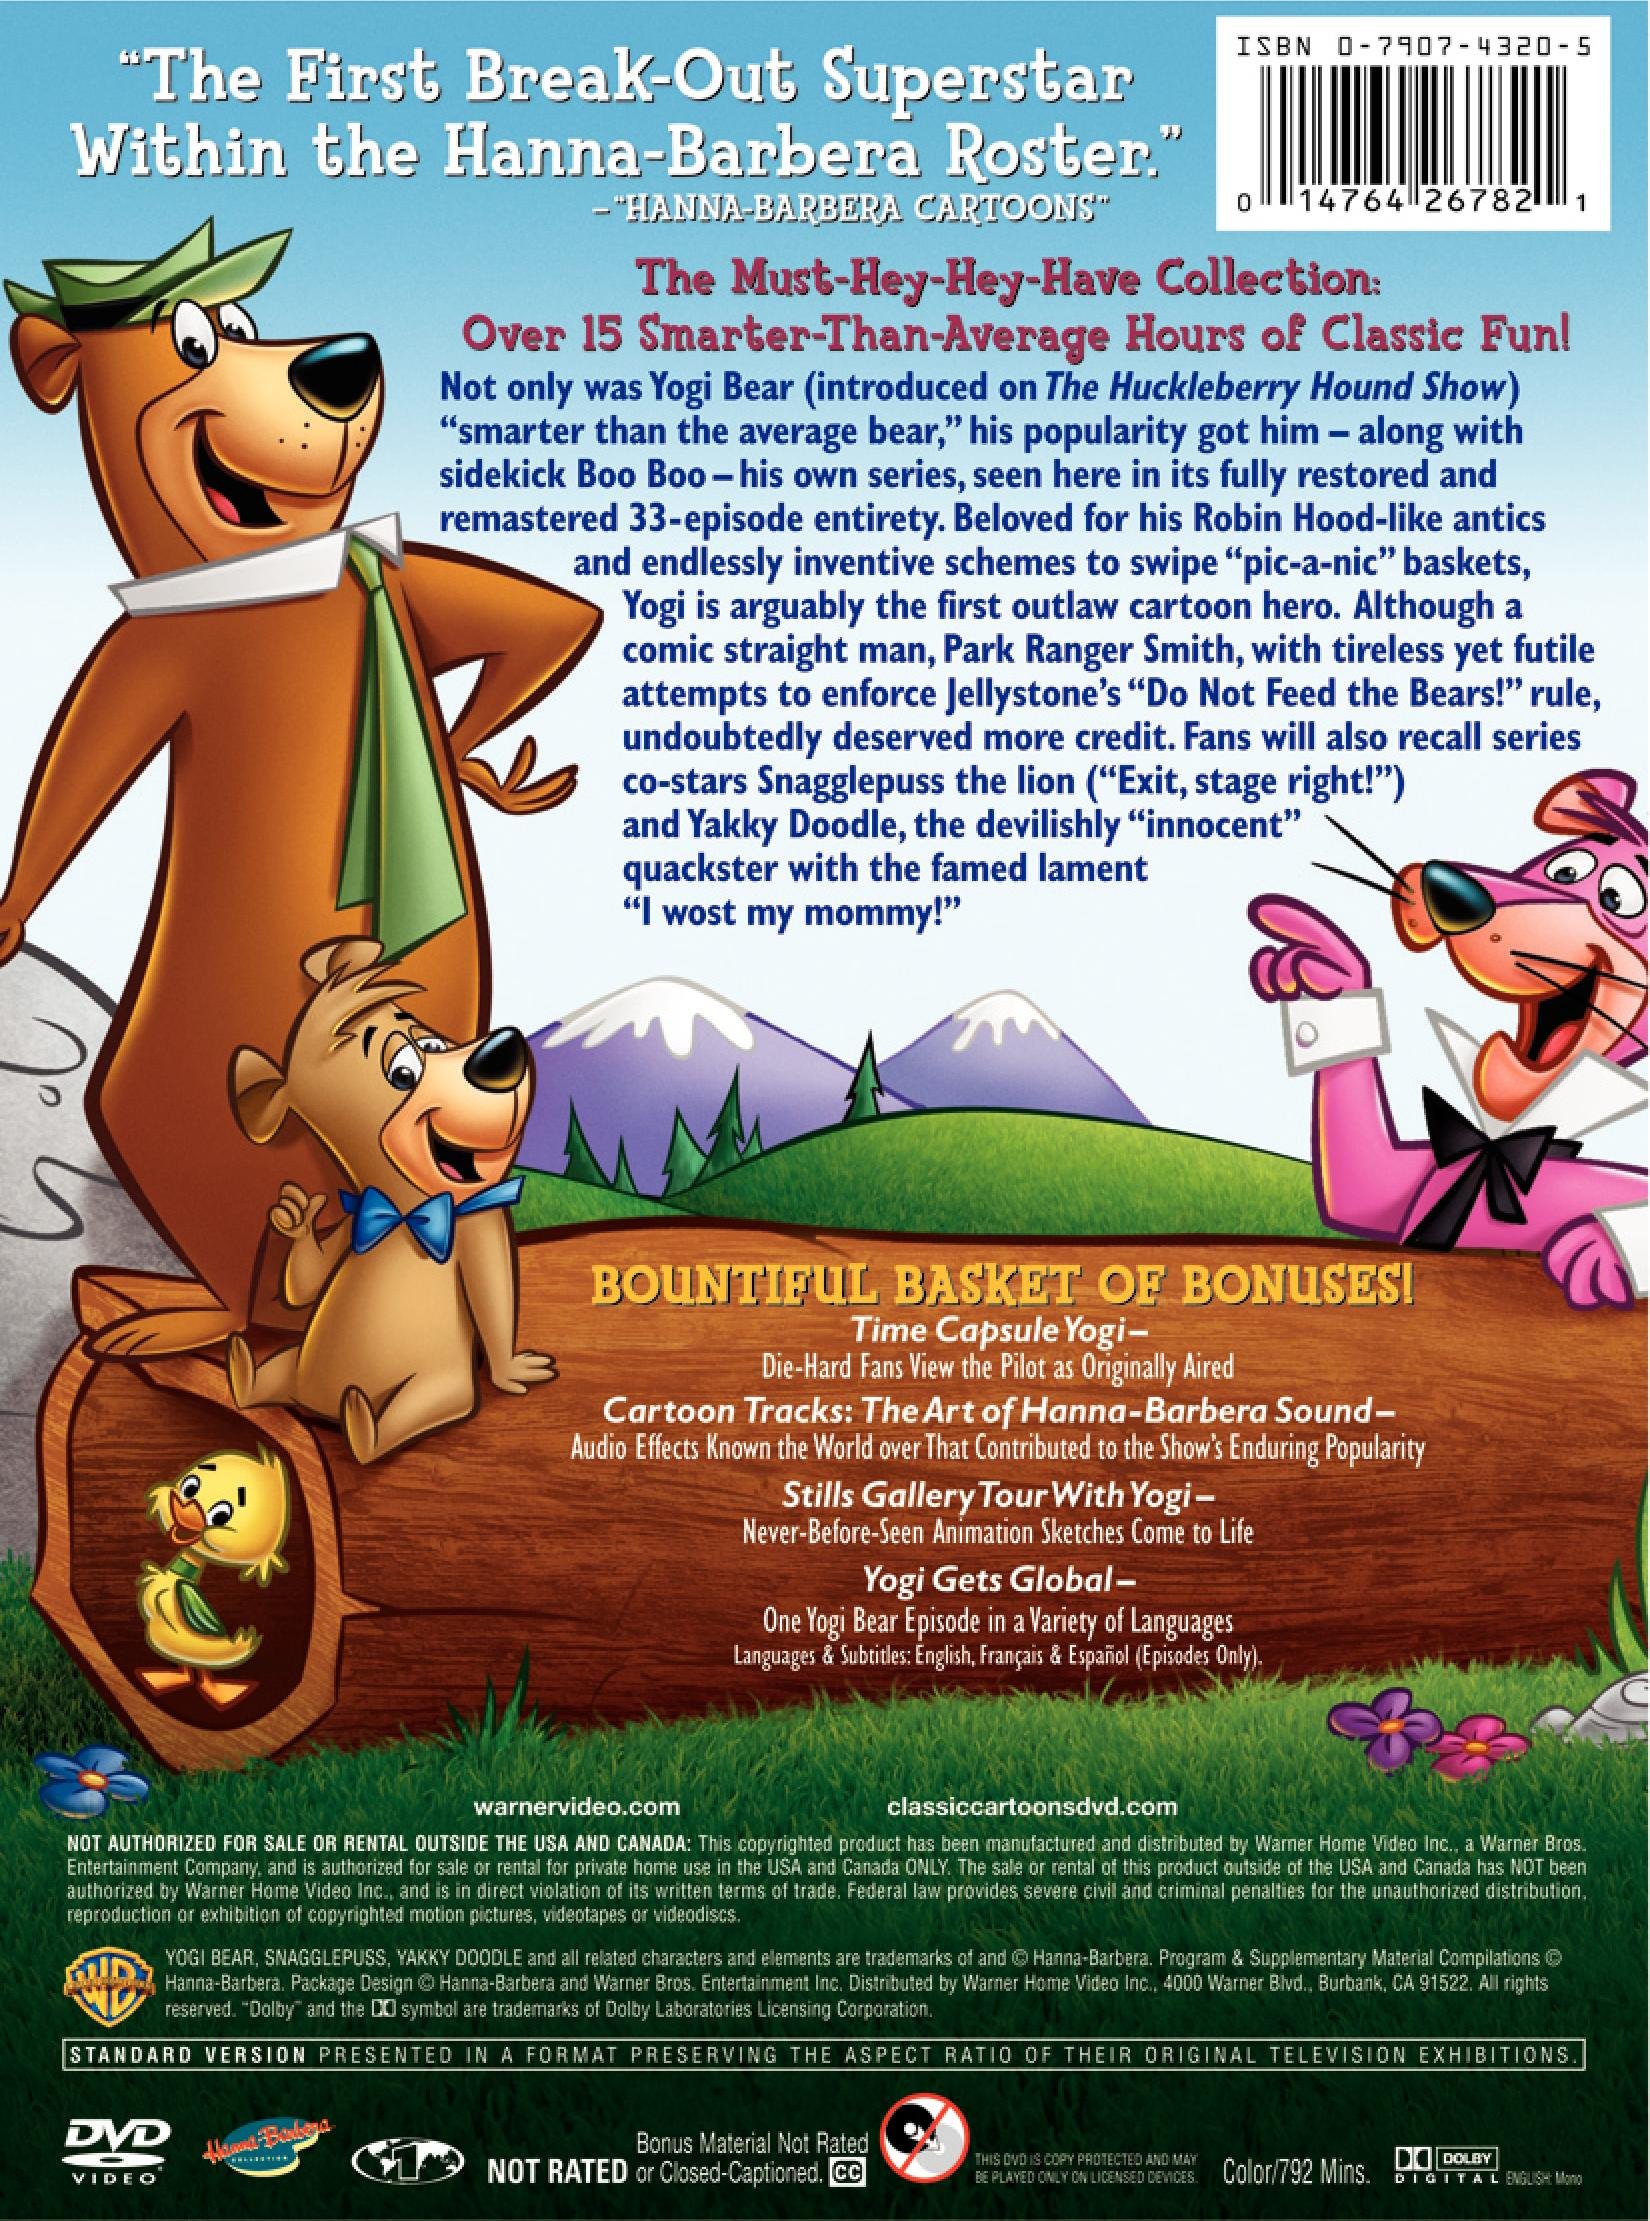 The Yogi Bear Show: The Complete Series (Full Frame) - image 2 of 2